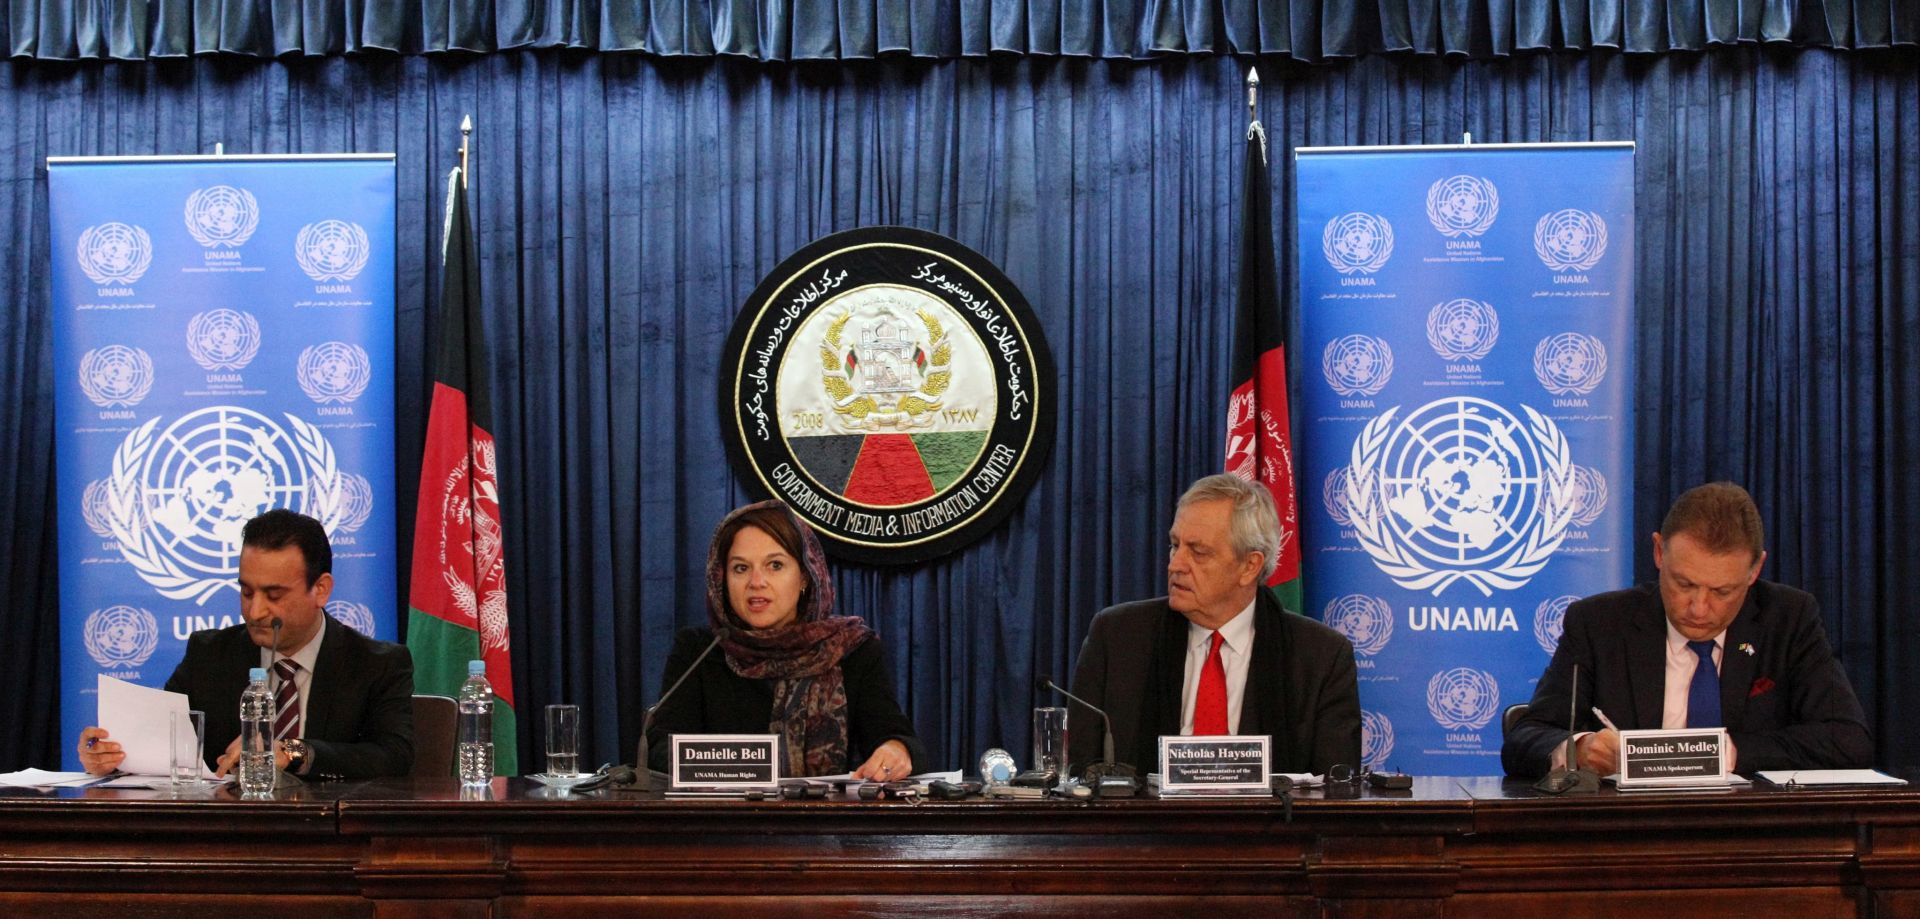 epa05160052 Nicholas Haysom (C-R), the UN special representative for Afghanistan, and Danielle Bell (C-L), UNAMA human rights director speak during a press conference in Kabul, Afghanistan, 14 February 2016. UN says more than 11,000 civilians were killed or wounded in violence in Afghanistan in 2015, making it the worst year for civilian casualties since the organization began compiling the statistics in 2009.  EPA/HEDAYATULLAH AMID